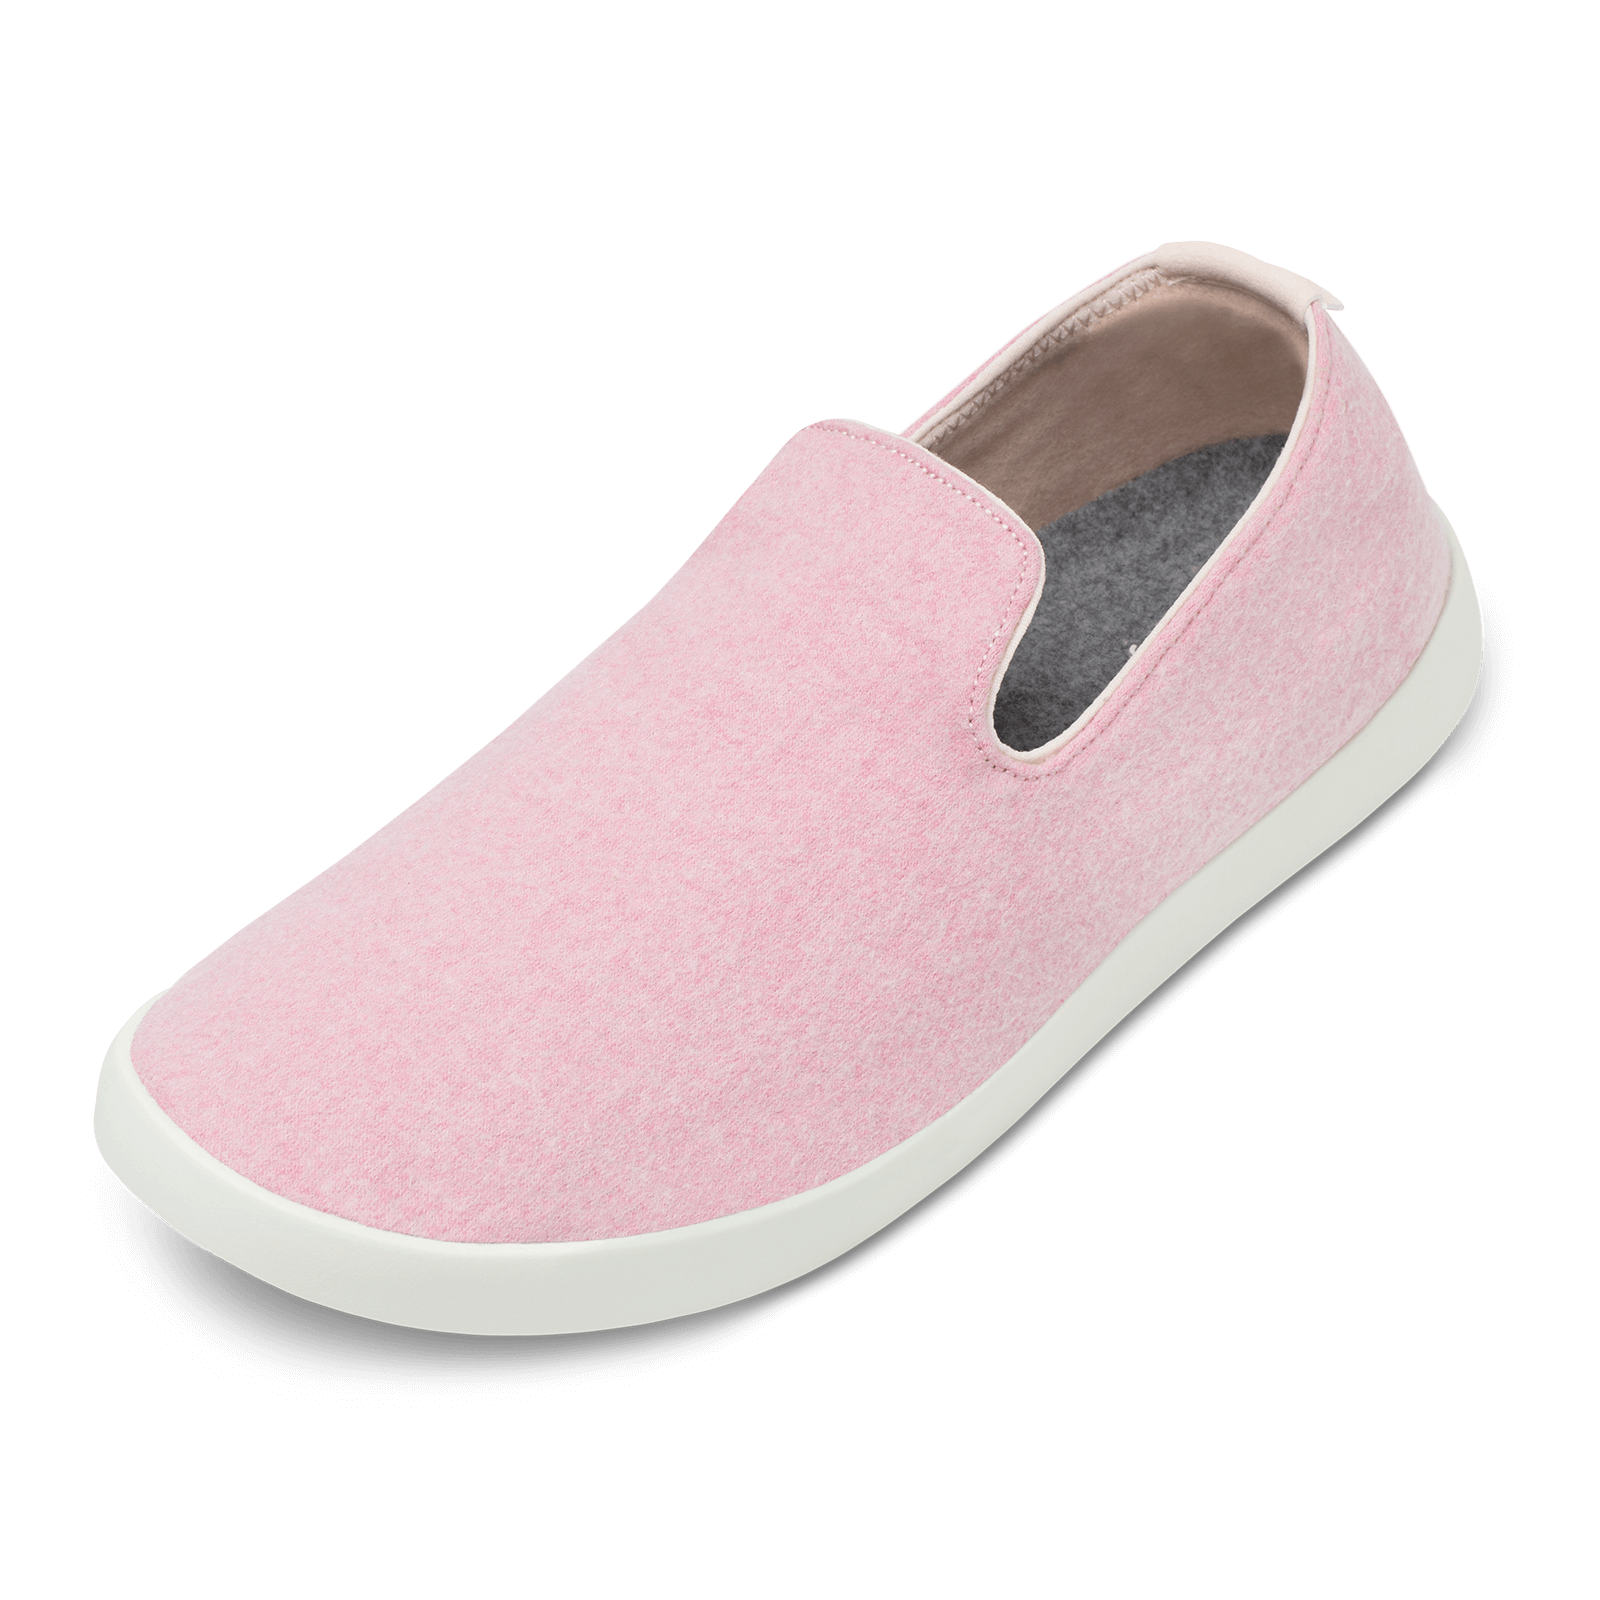 Women's Wool Loungers - Calm Taupe (Blizzard Sole)